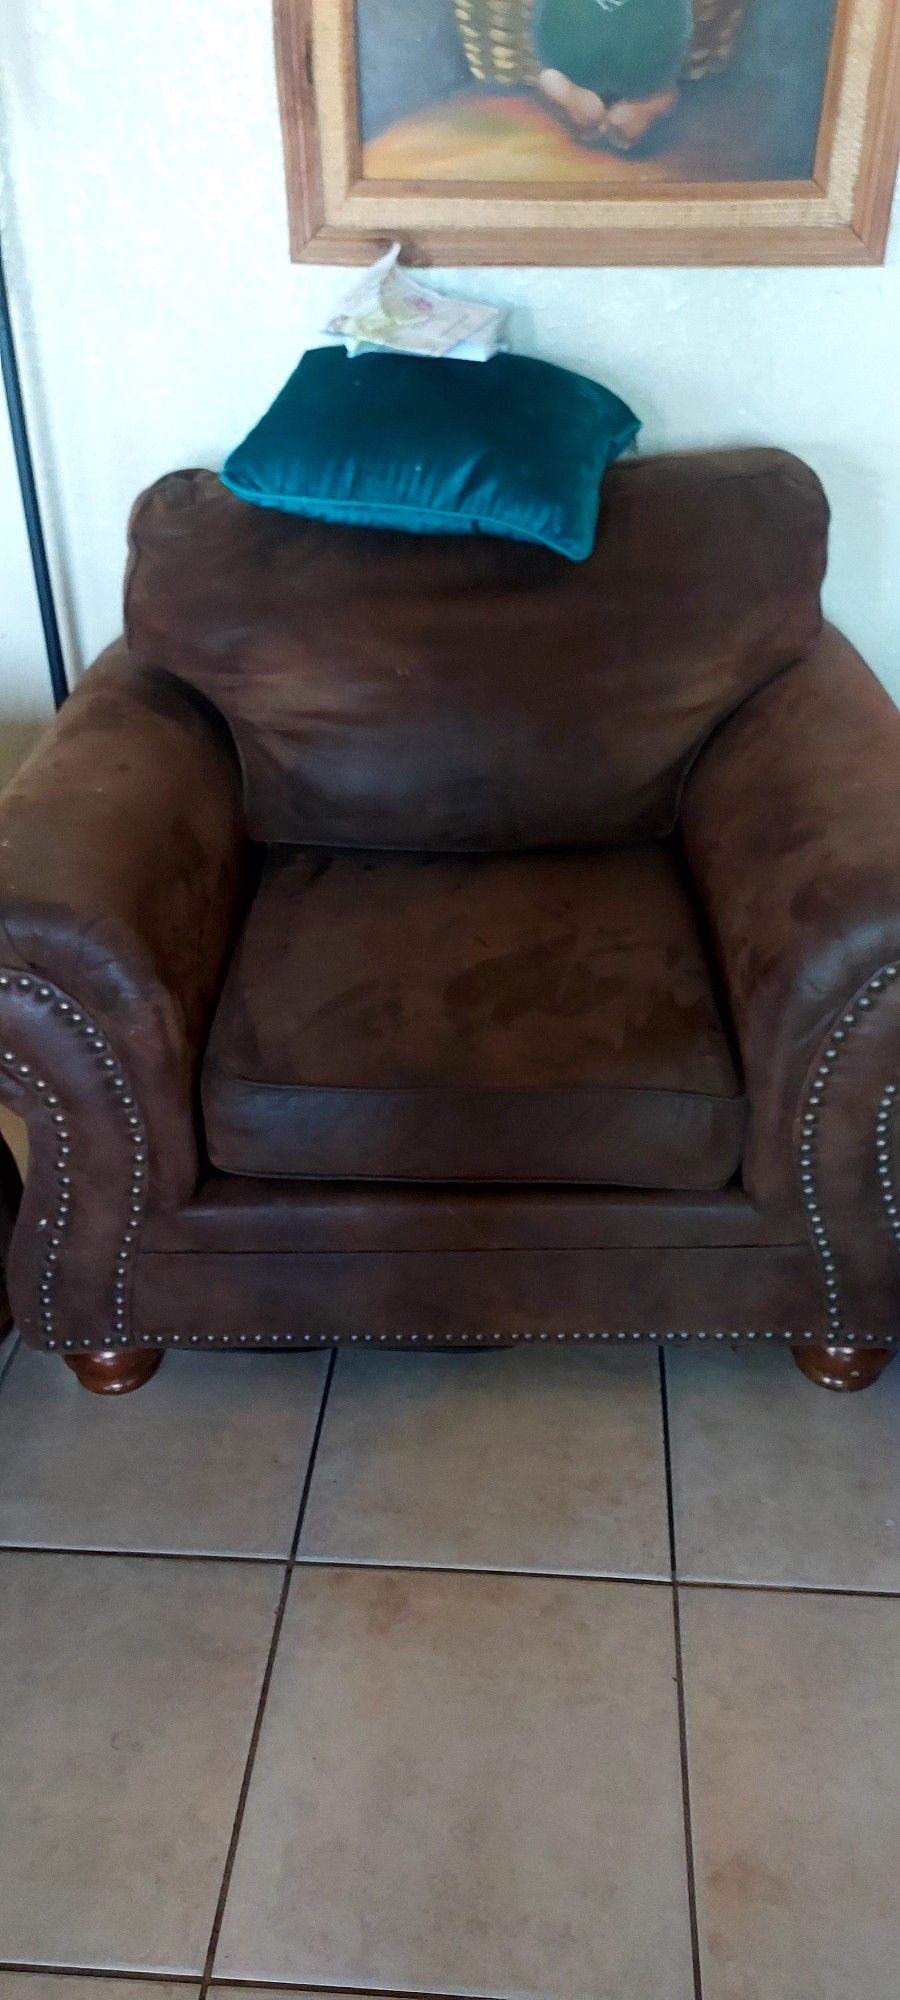 Couches Sofa Free Come Pick Up